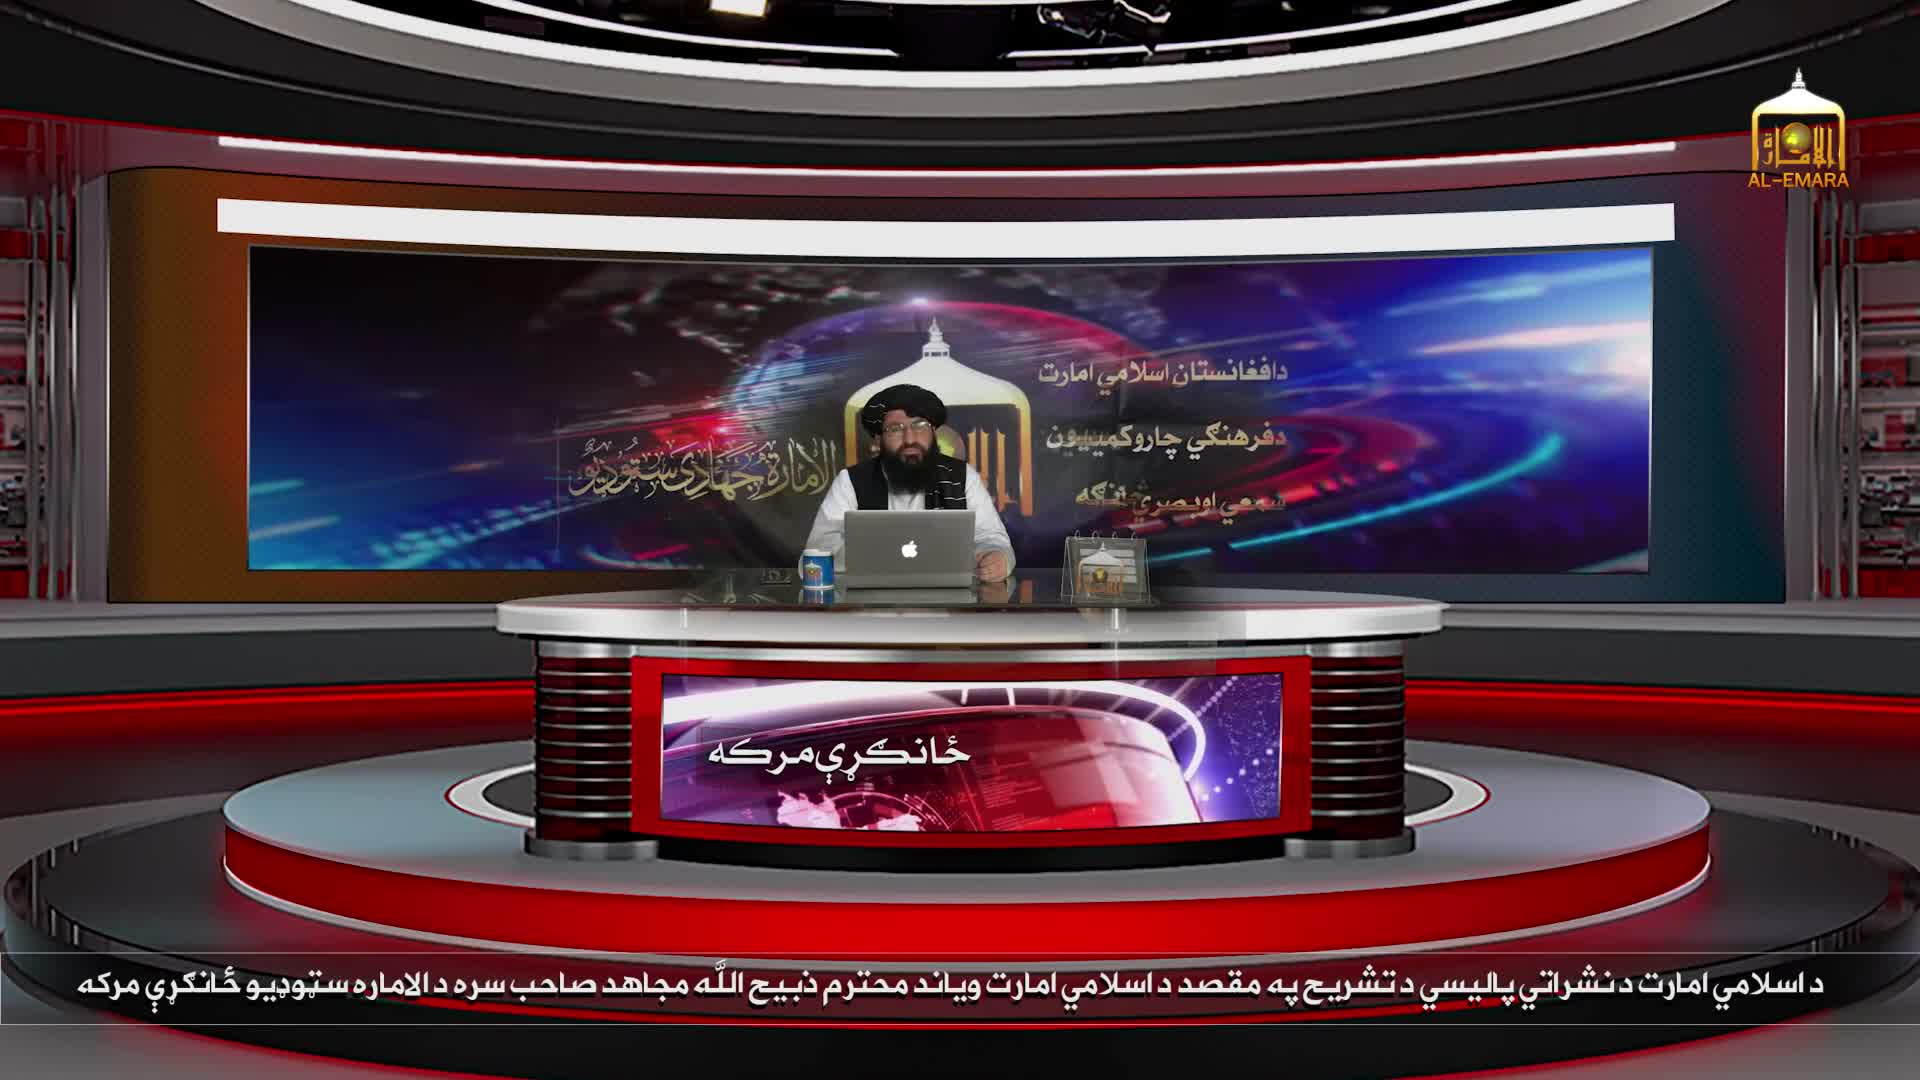 IEA-An Exclusive Interview with the Spokesman Dhabih Allah Mujahid To Explain the Broadcasting Policy of the Islamic Emirate - 22 April 2020_3522_grab